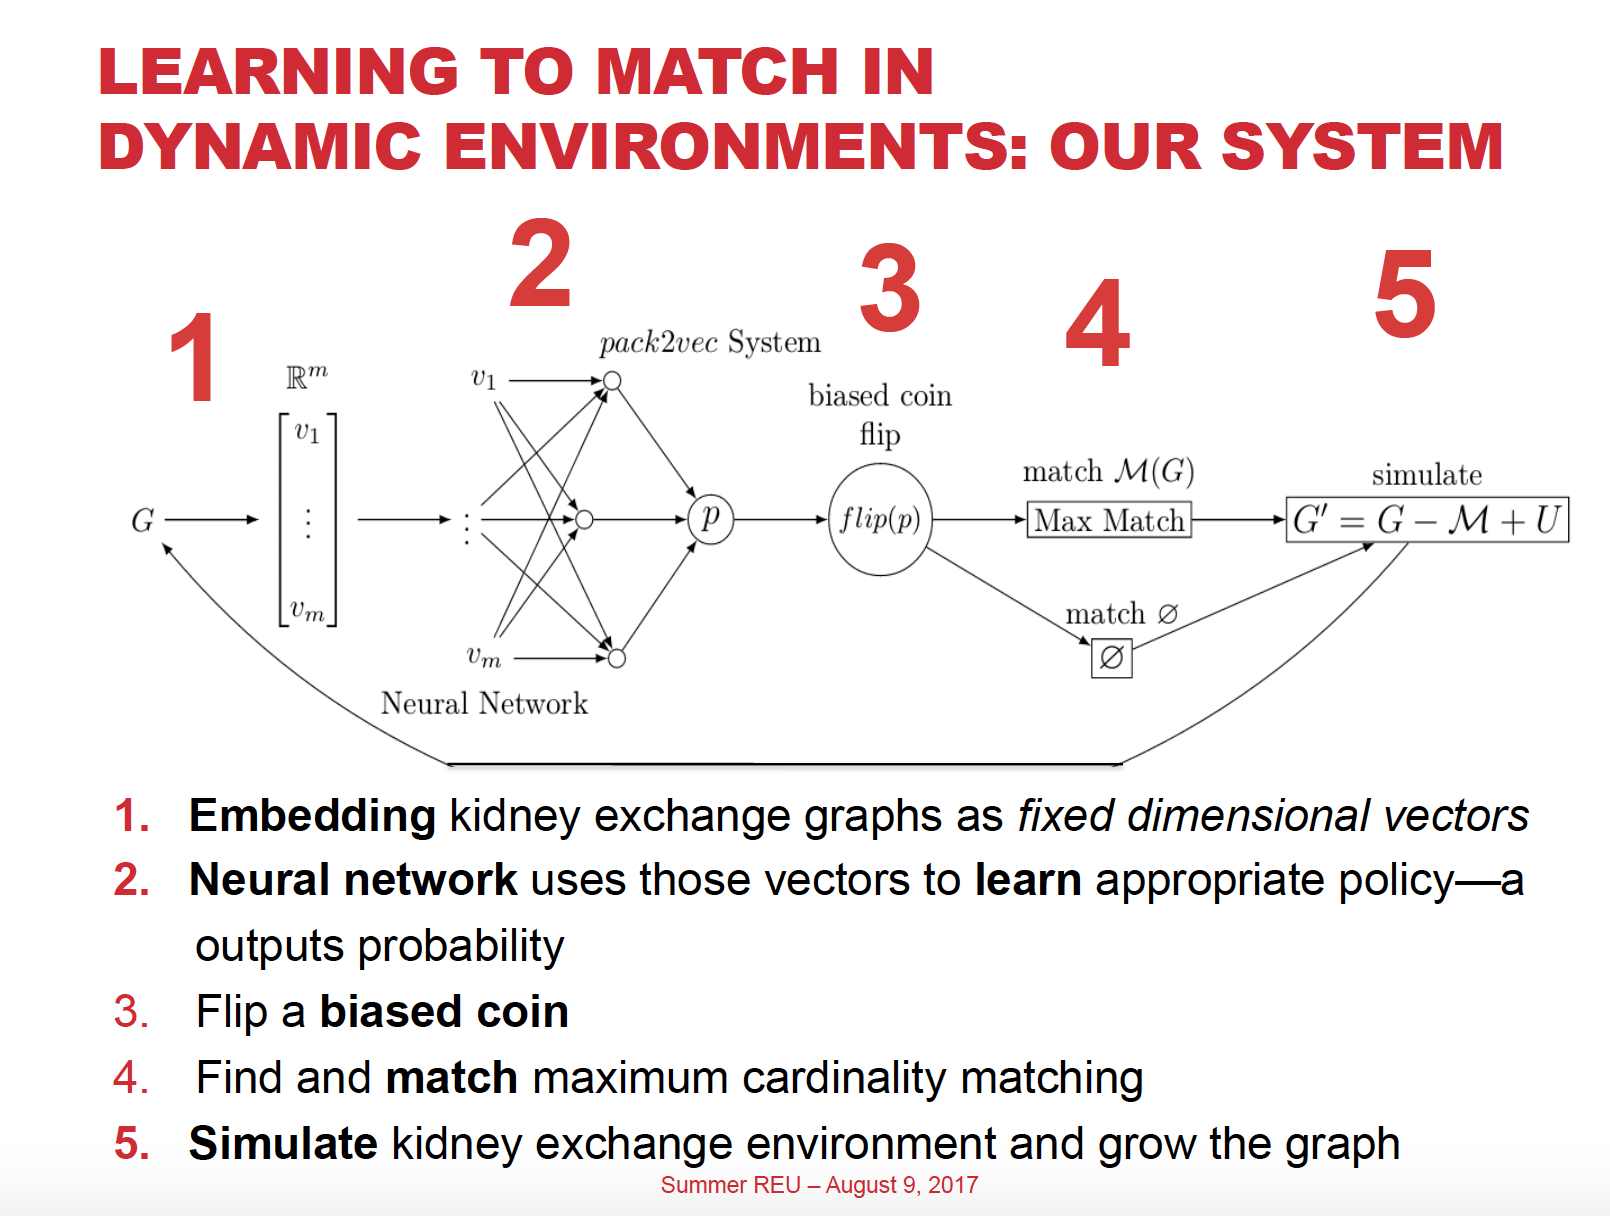 A diagram of a neural network that takes a kidney exchange graph as input, embeds the graph as a vector, and outputs a probability. the system then flips a biased coin to choose to or not do the matching for the graph. We then grow the graph, remove the matched vertices if necessary, and repeat the process.